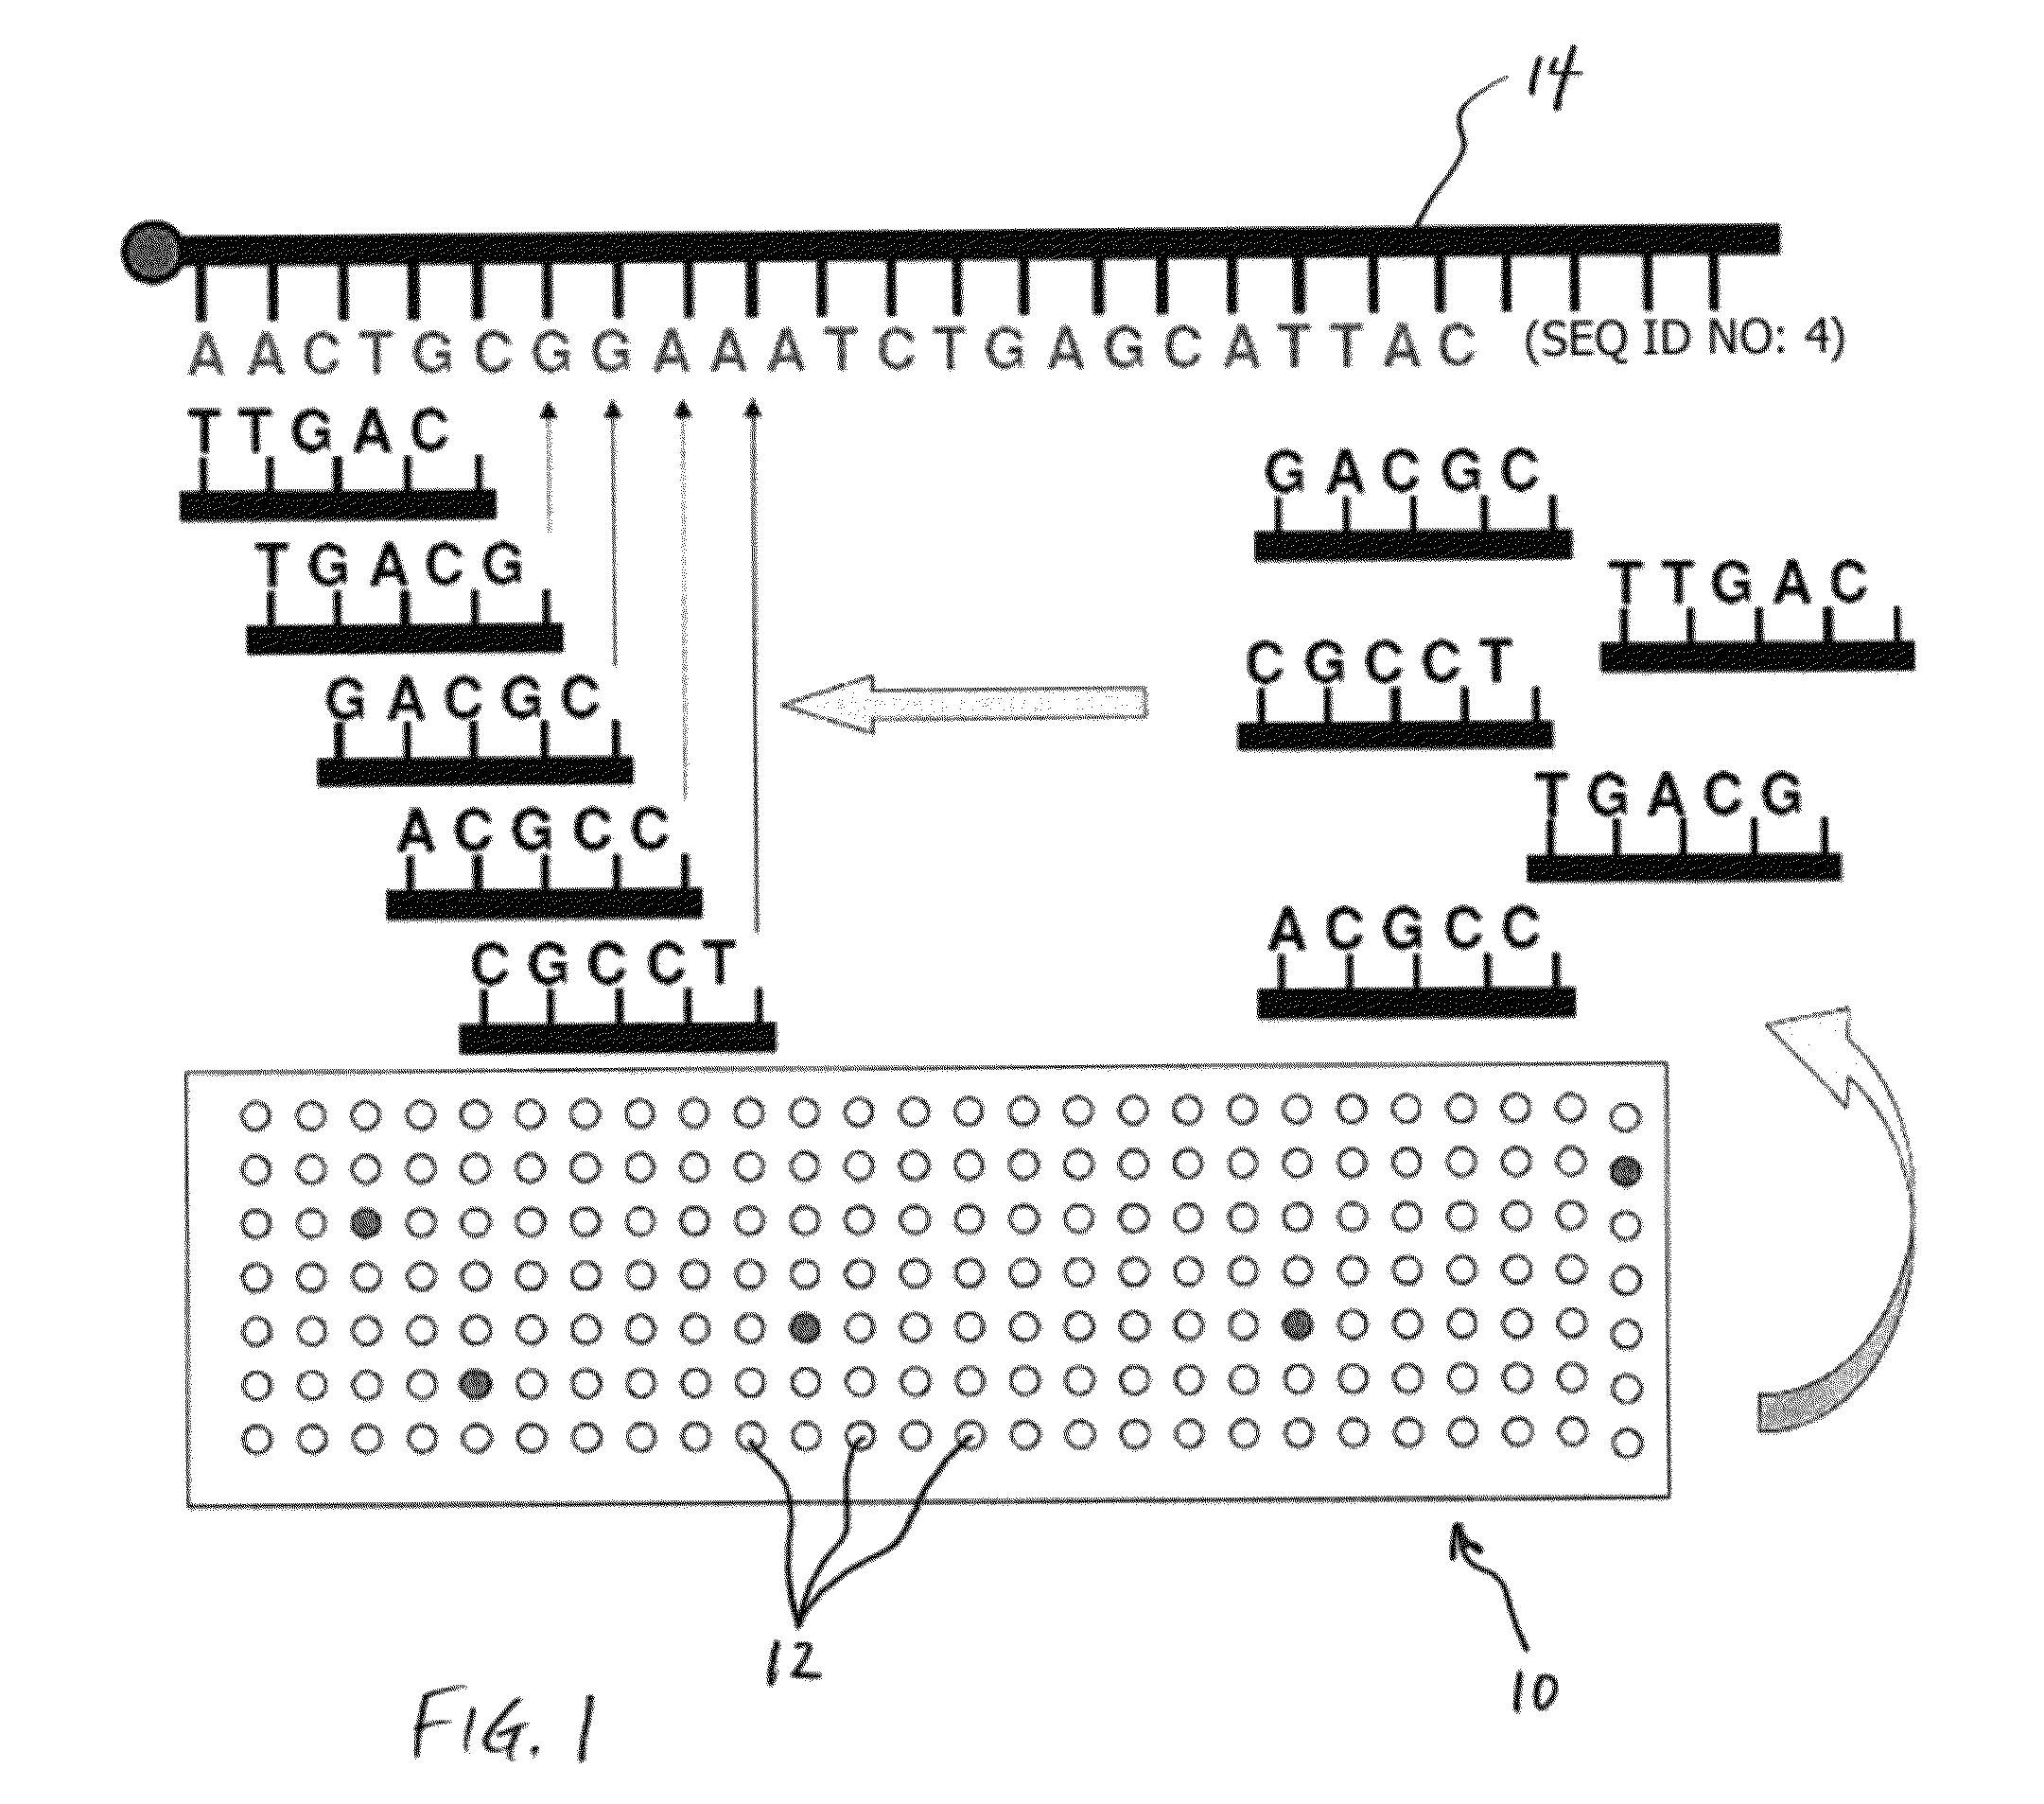 Methods for sequencing a biomolecule by detecting relative positions of hybridized probes